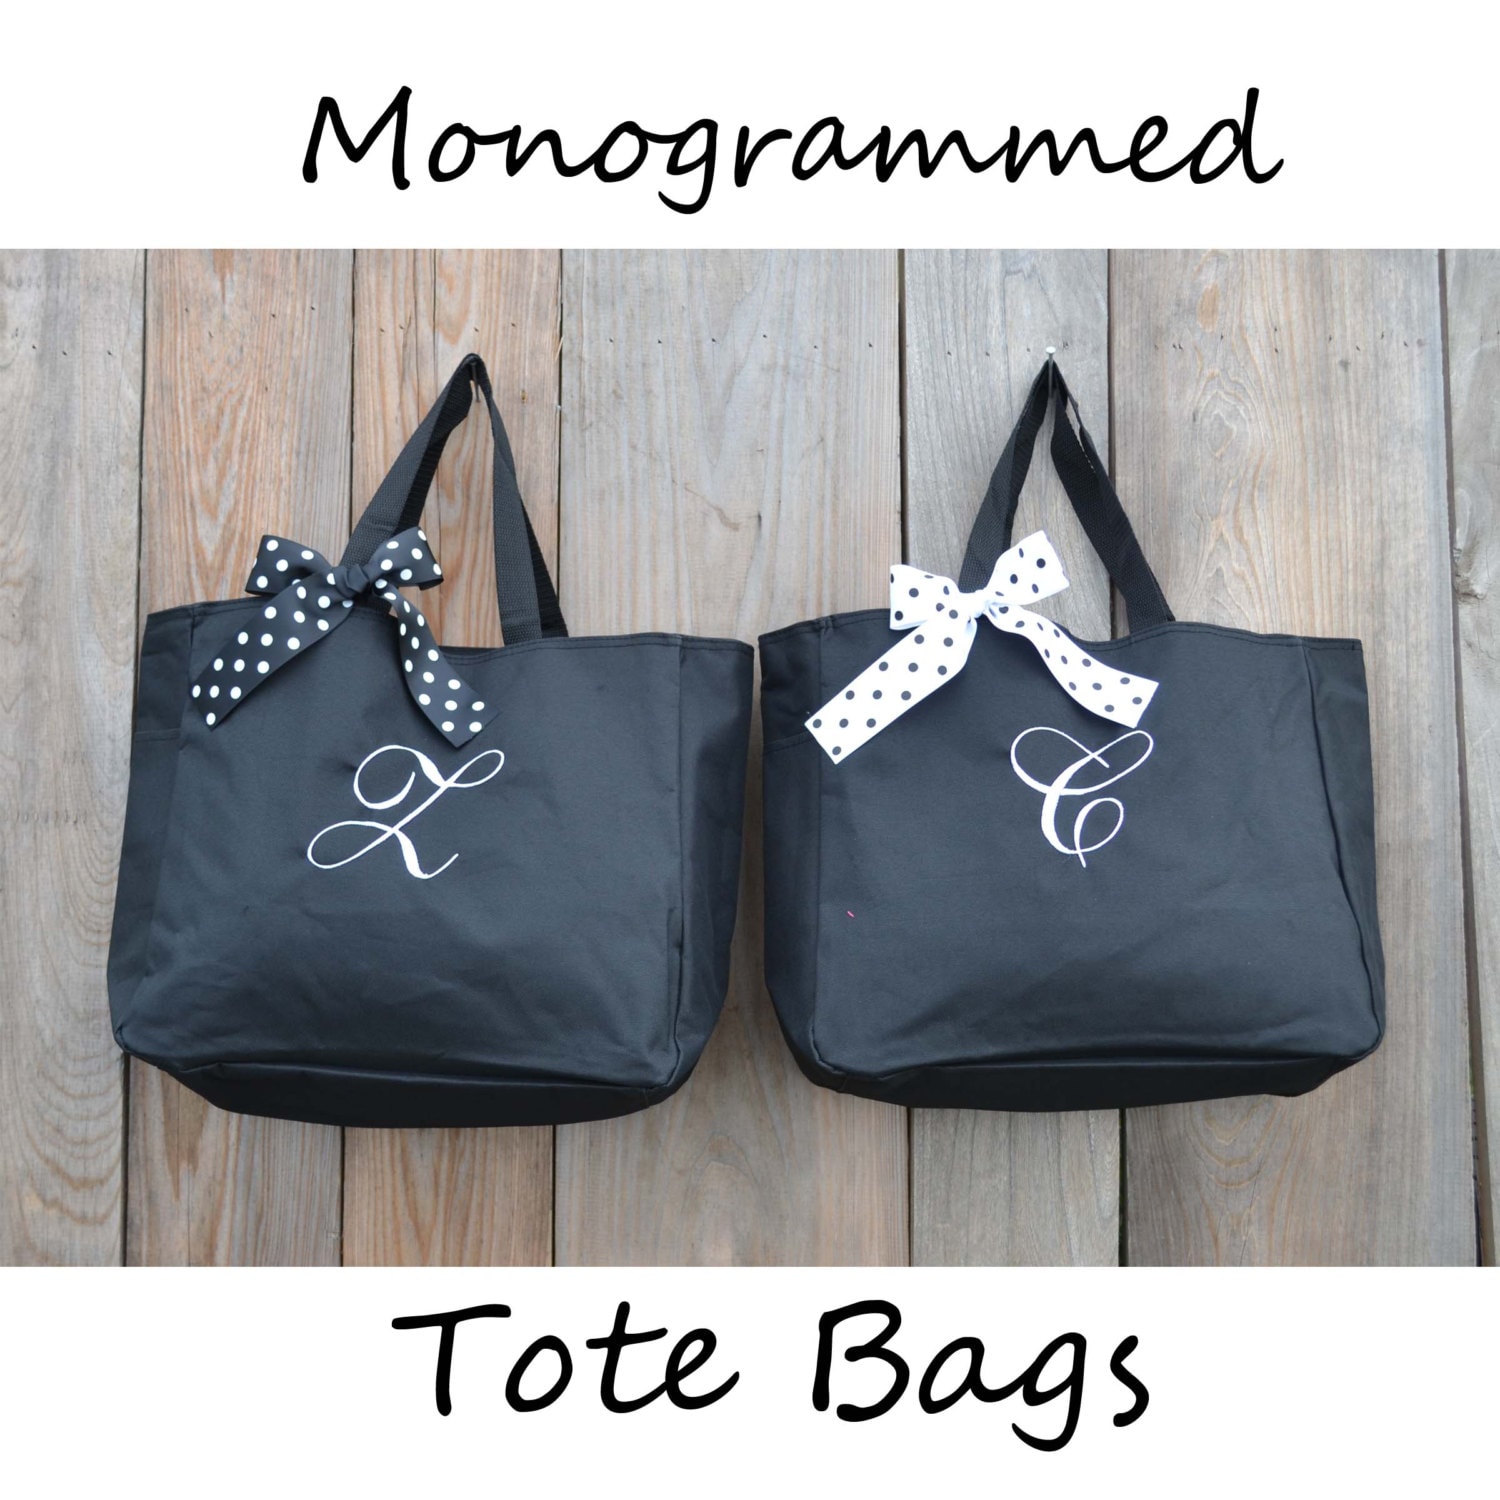 6 Personalized Bridesmaid Gift Tote Bags Monogrammed Tote